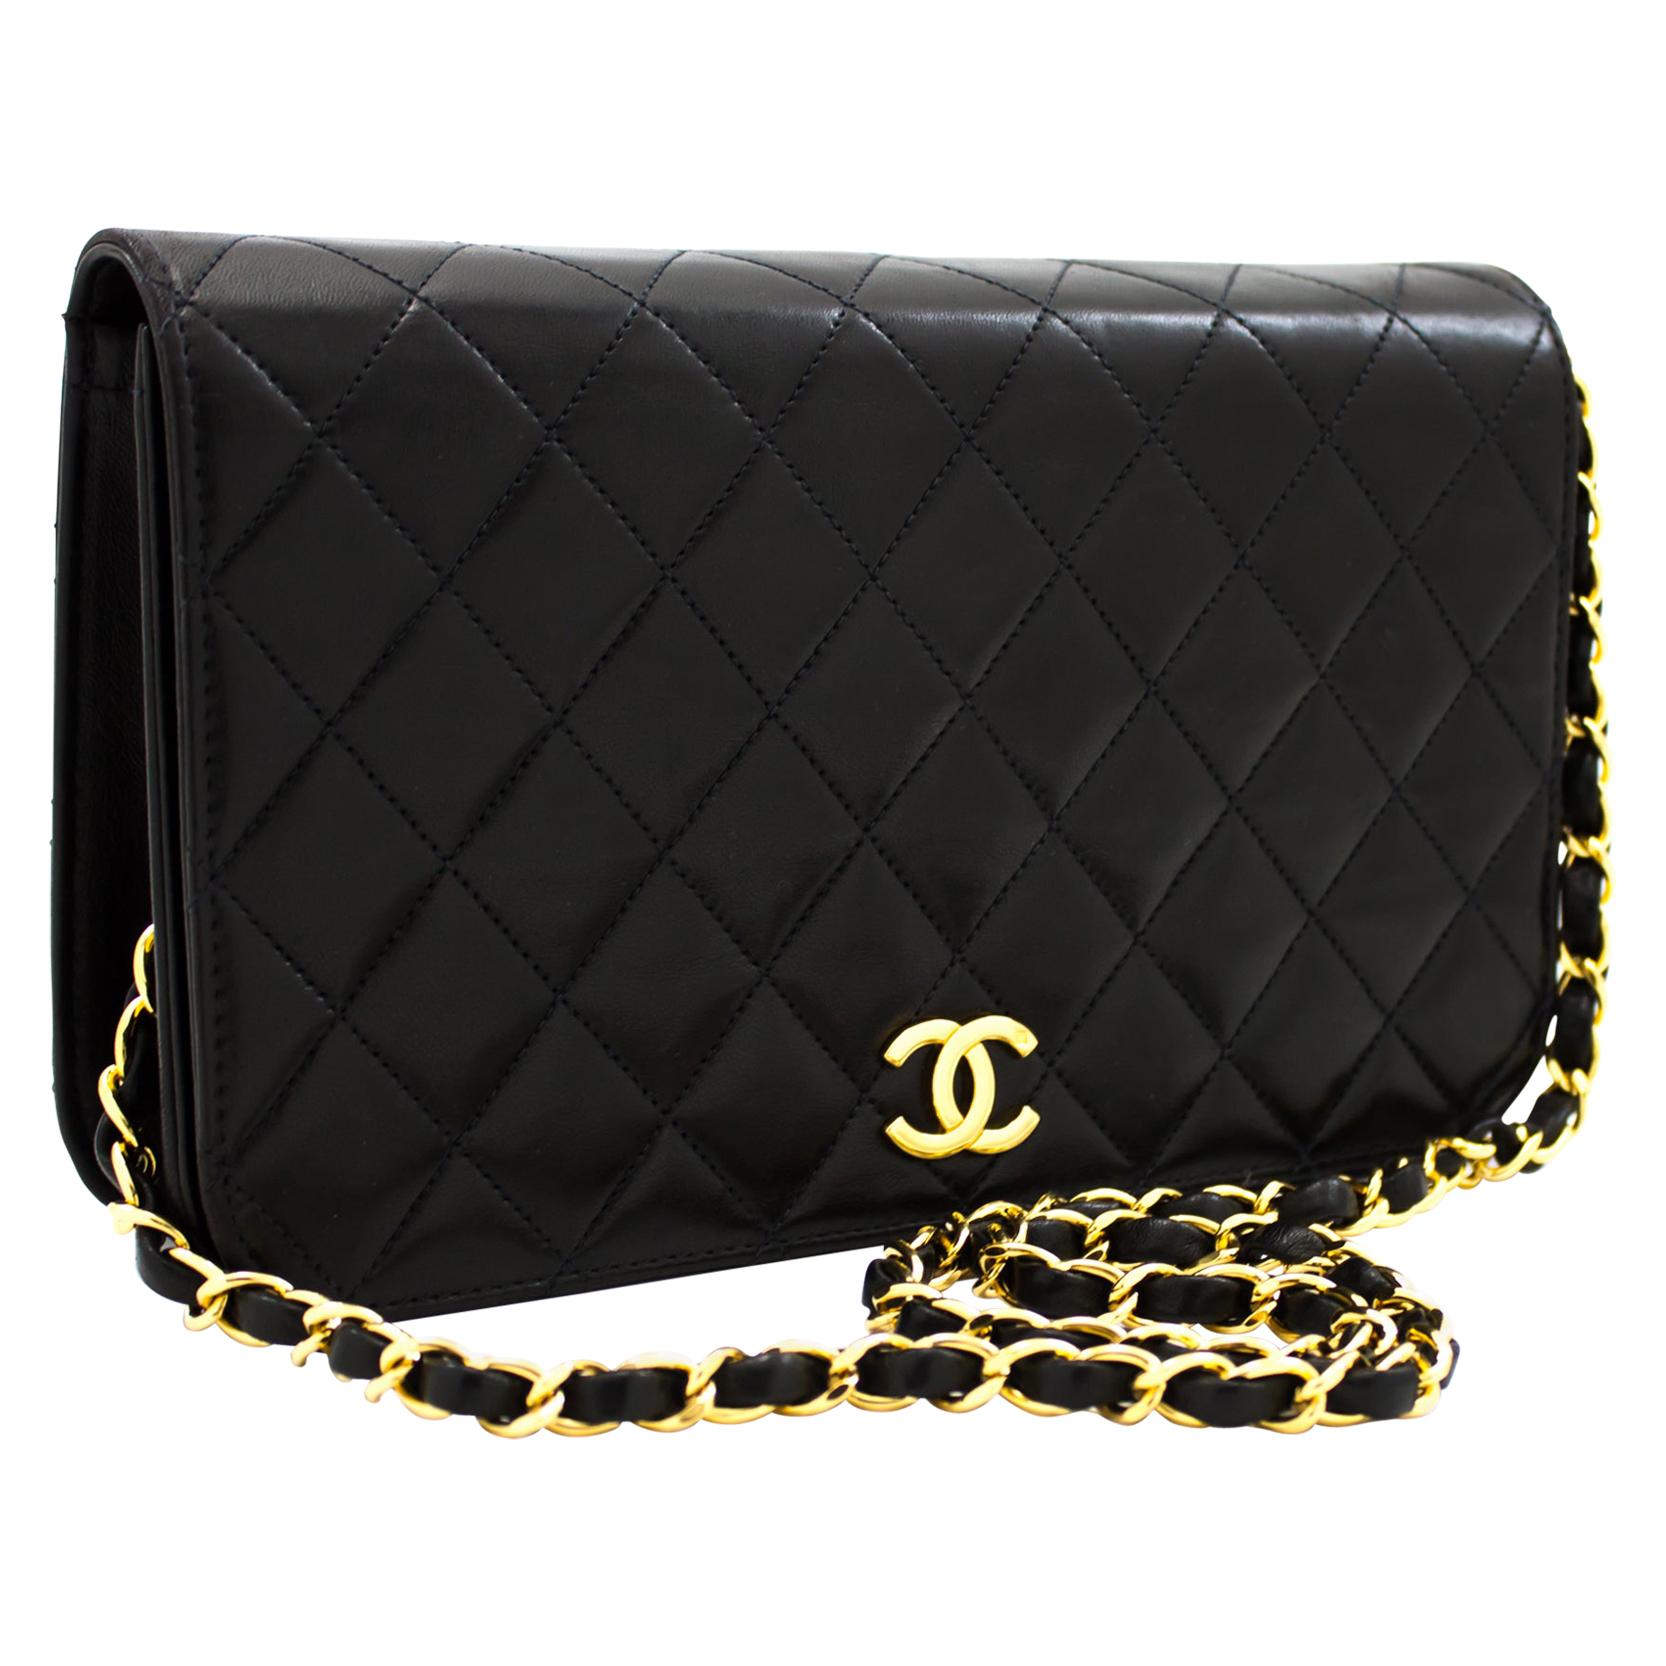 CHANEL Chain Shoulder Bag Black Clutch Flap Quilted Lambskin Leather